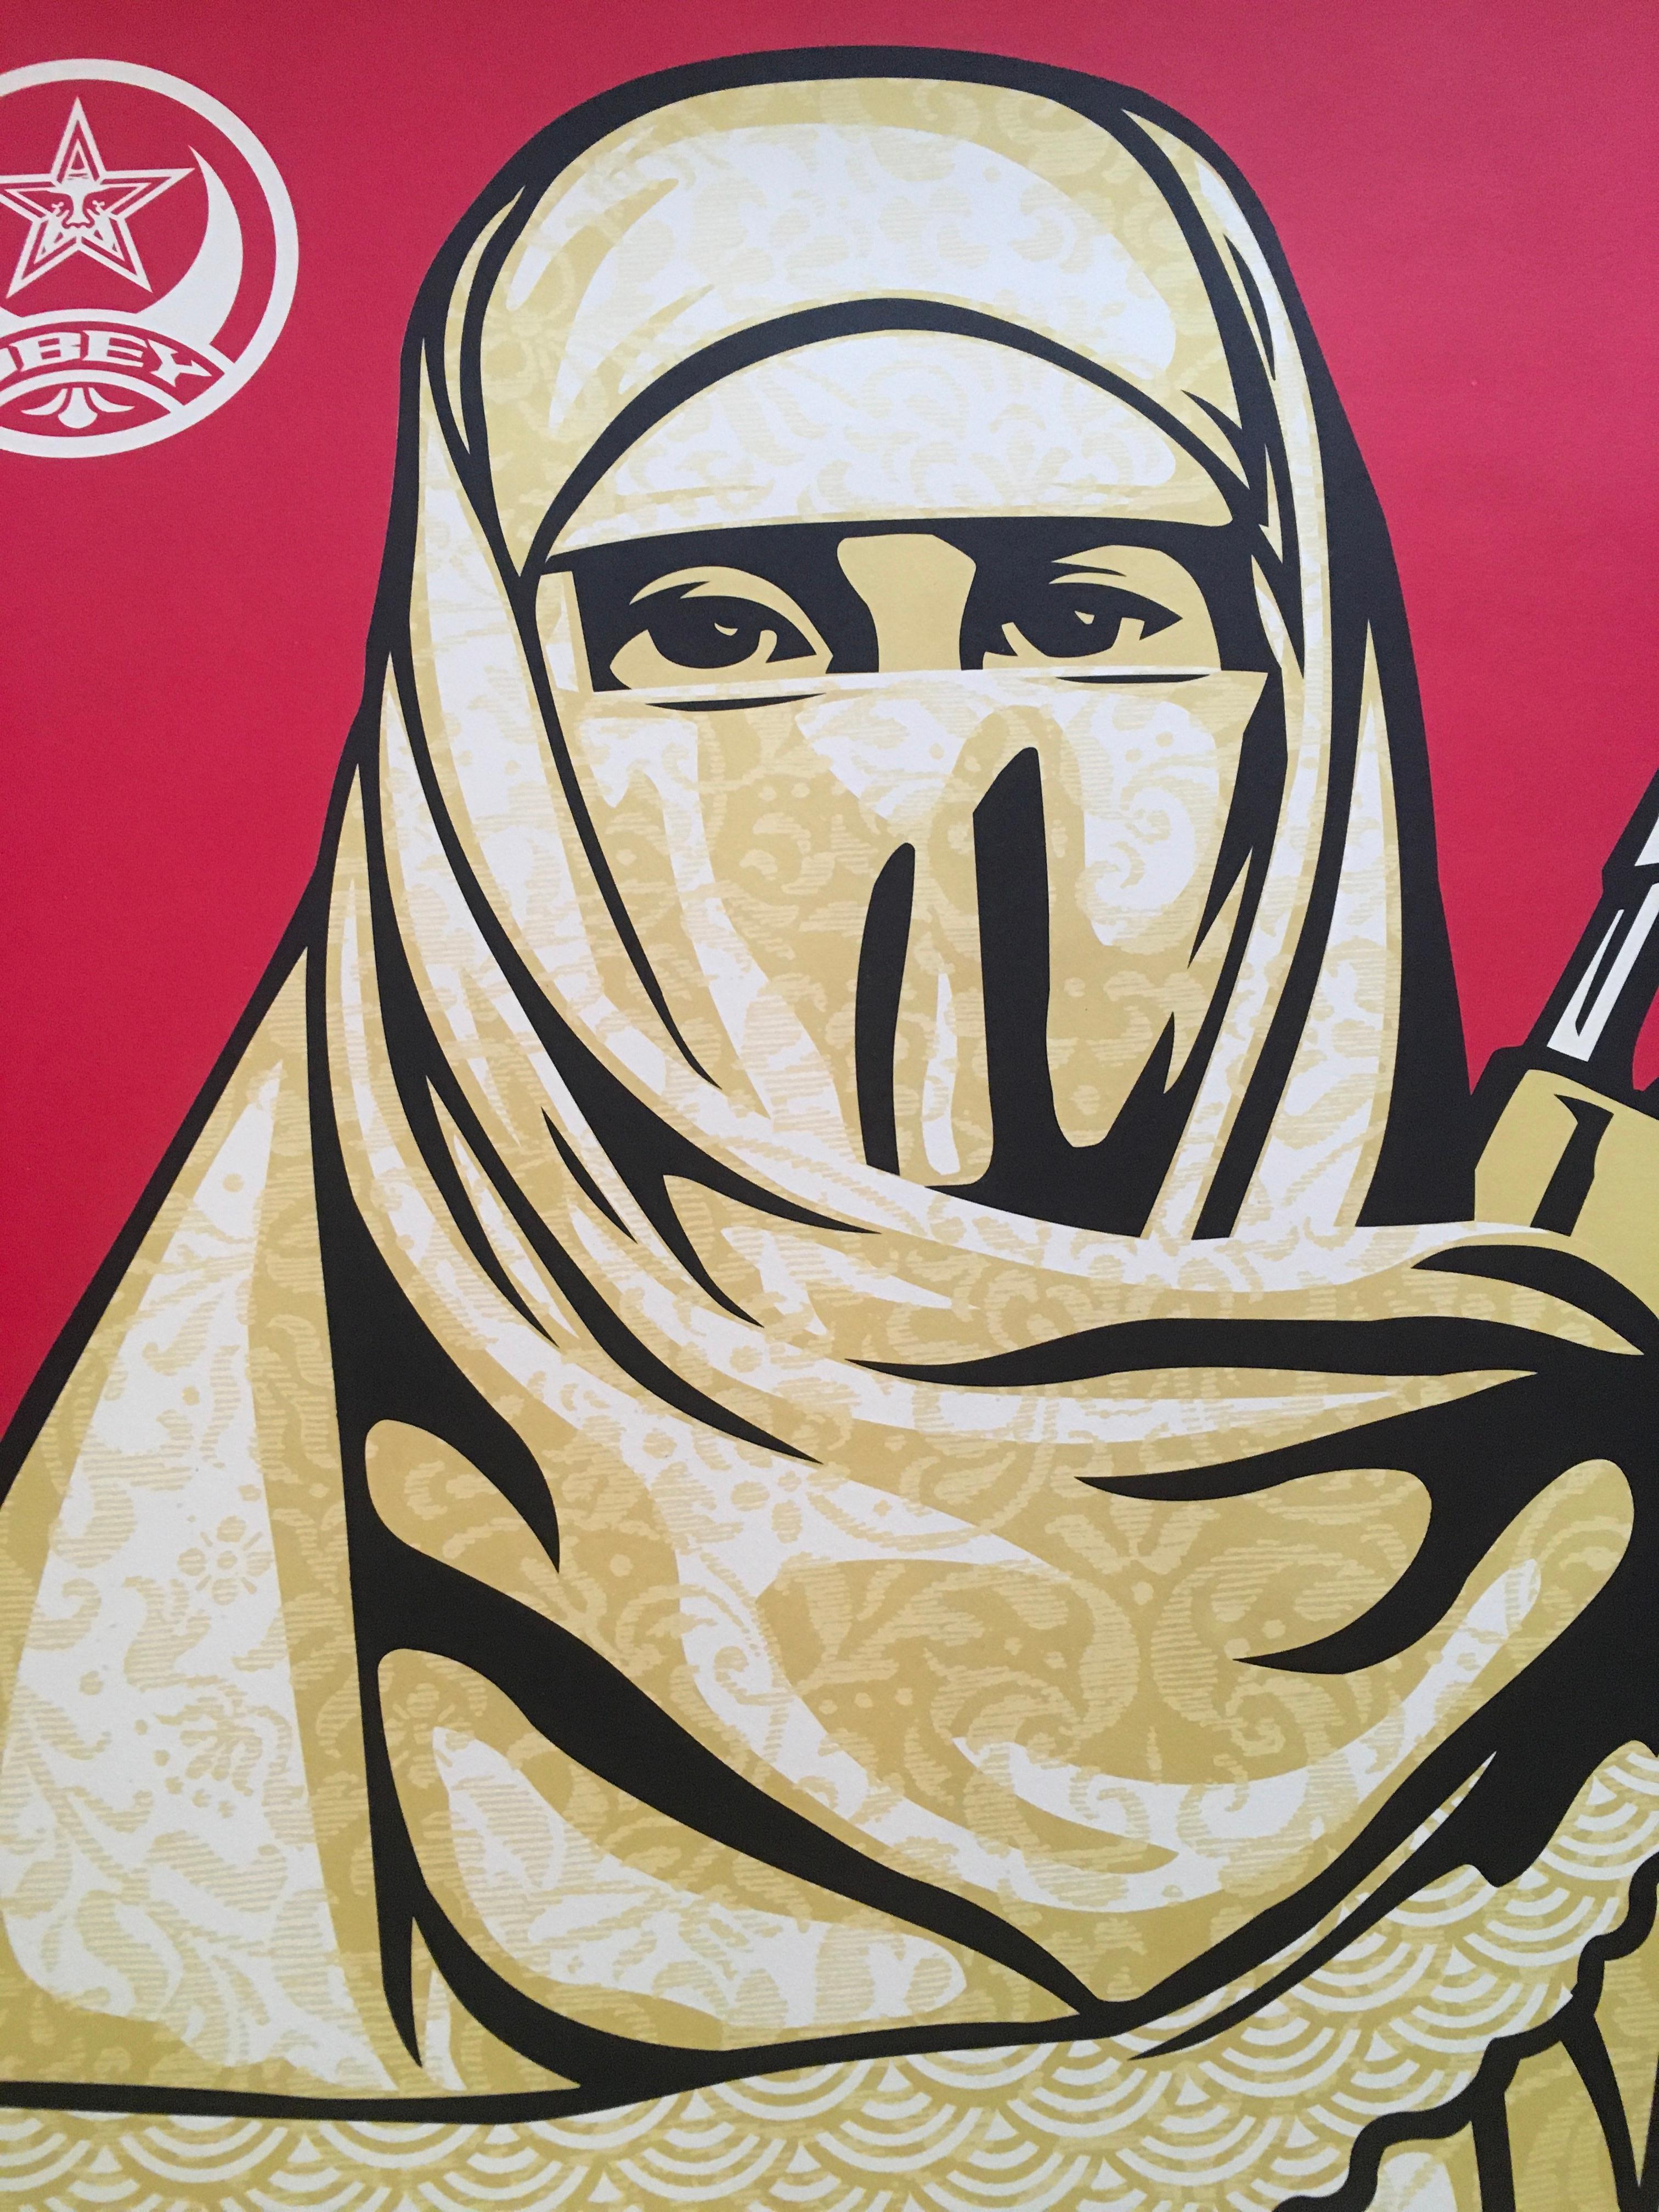 'Muslim Woman' by Shepard Fairey, 2005
24 x 36 inches (61 x 91,4 cm)
Offset Lithograph on  Fine Art Paper.
Limited edition of 750 (AP)
Hand-signed and dated in pencil by Shepard Fairey. Signature and date appear on the bottom right, the number on